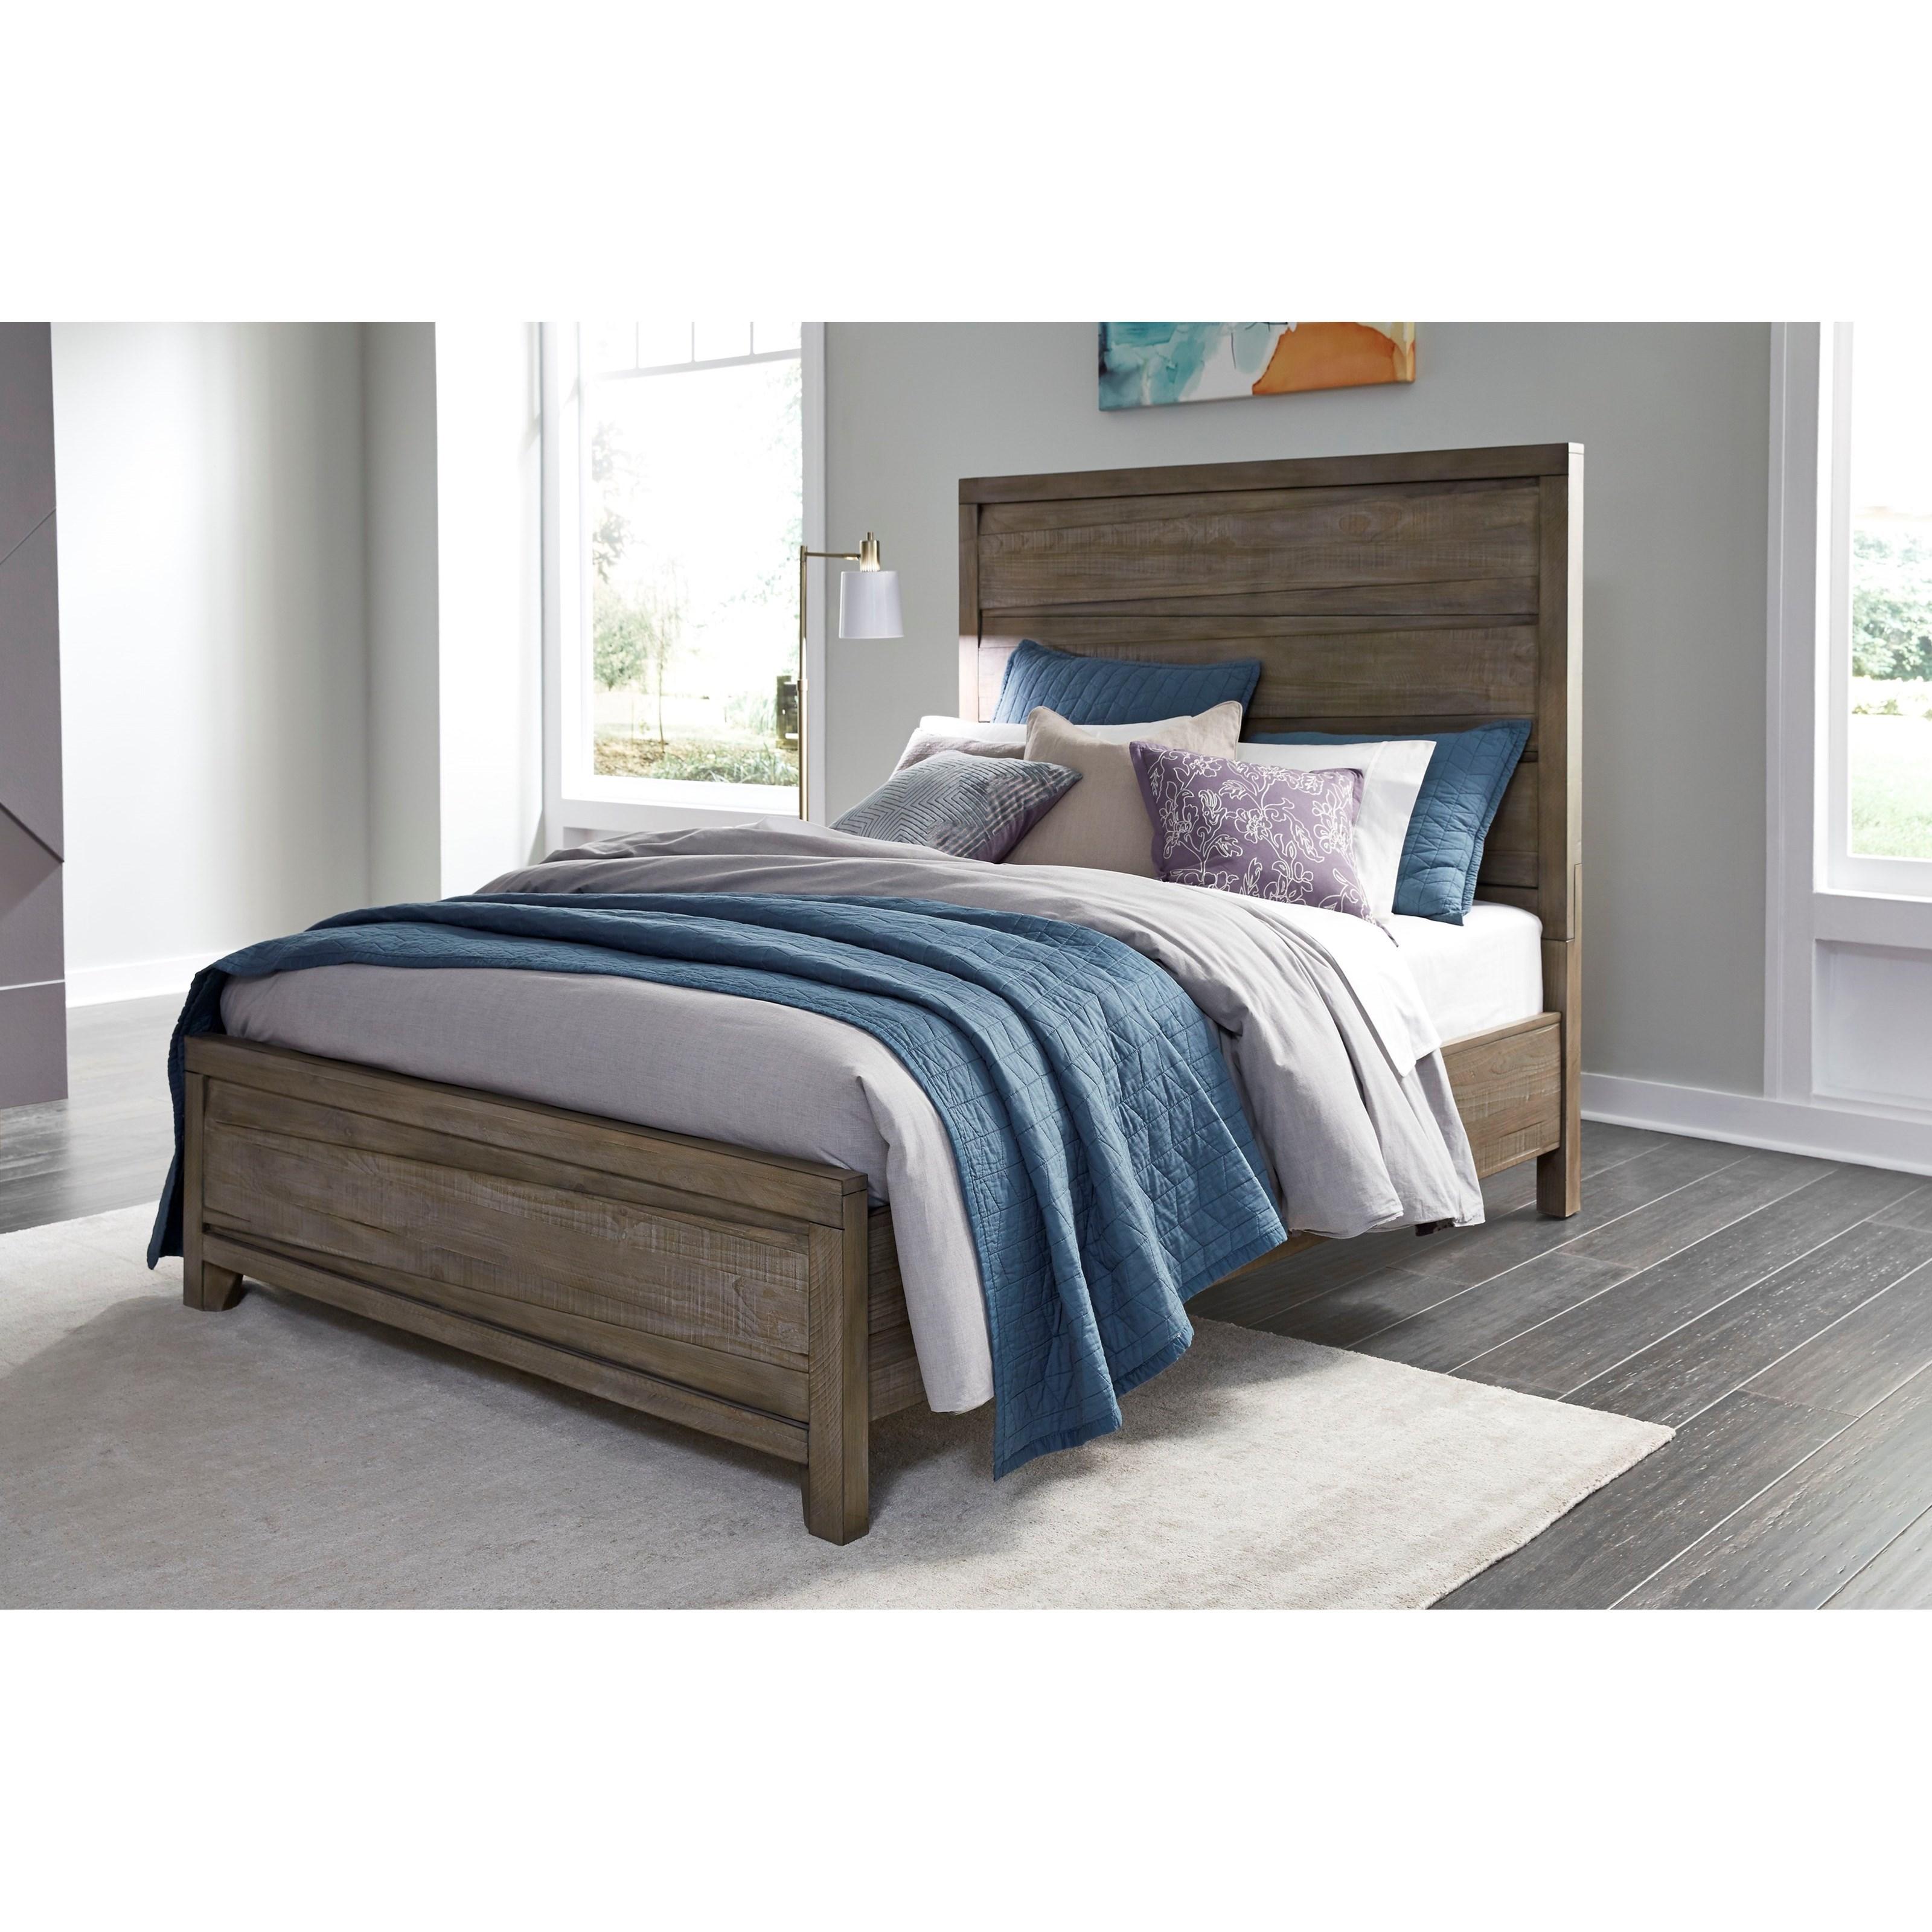 Casual, Rustic Panel Bed HEARST 6VF3A5 in Tan 